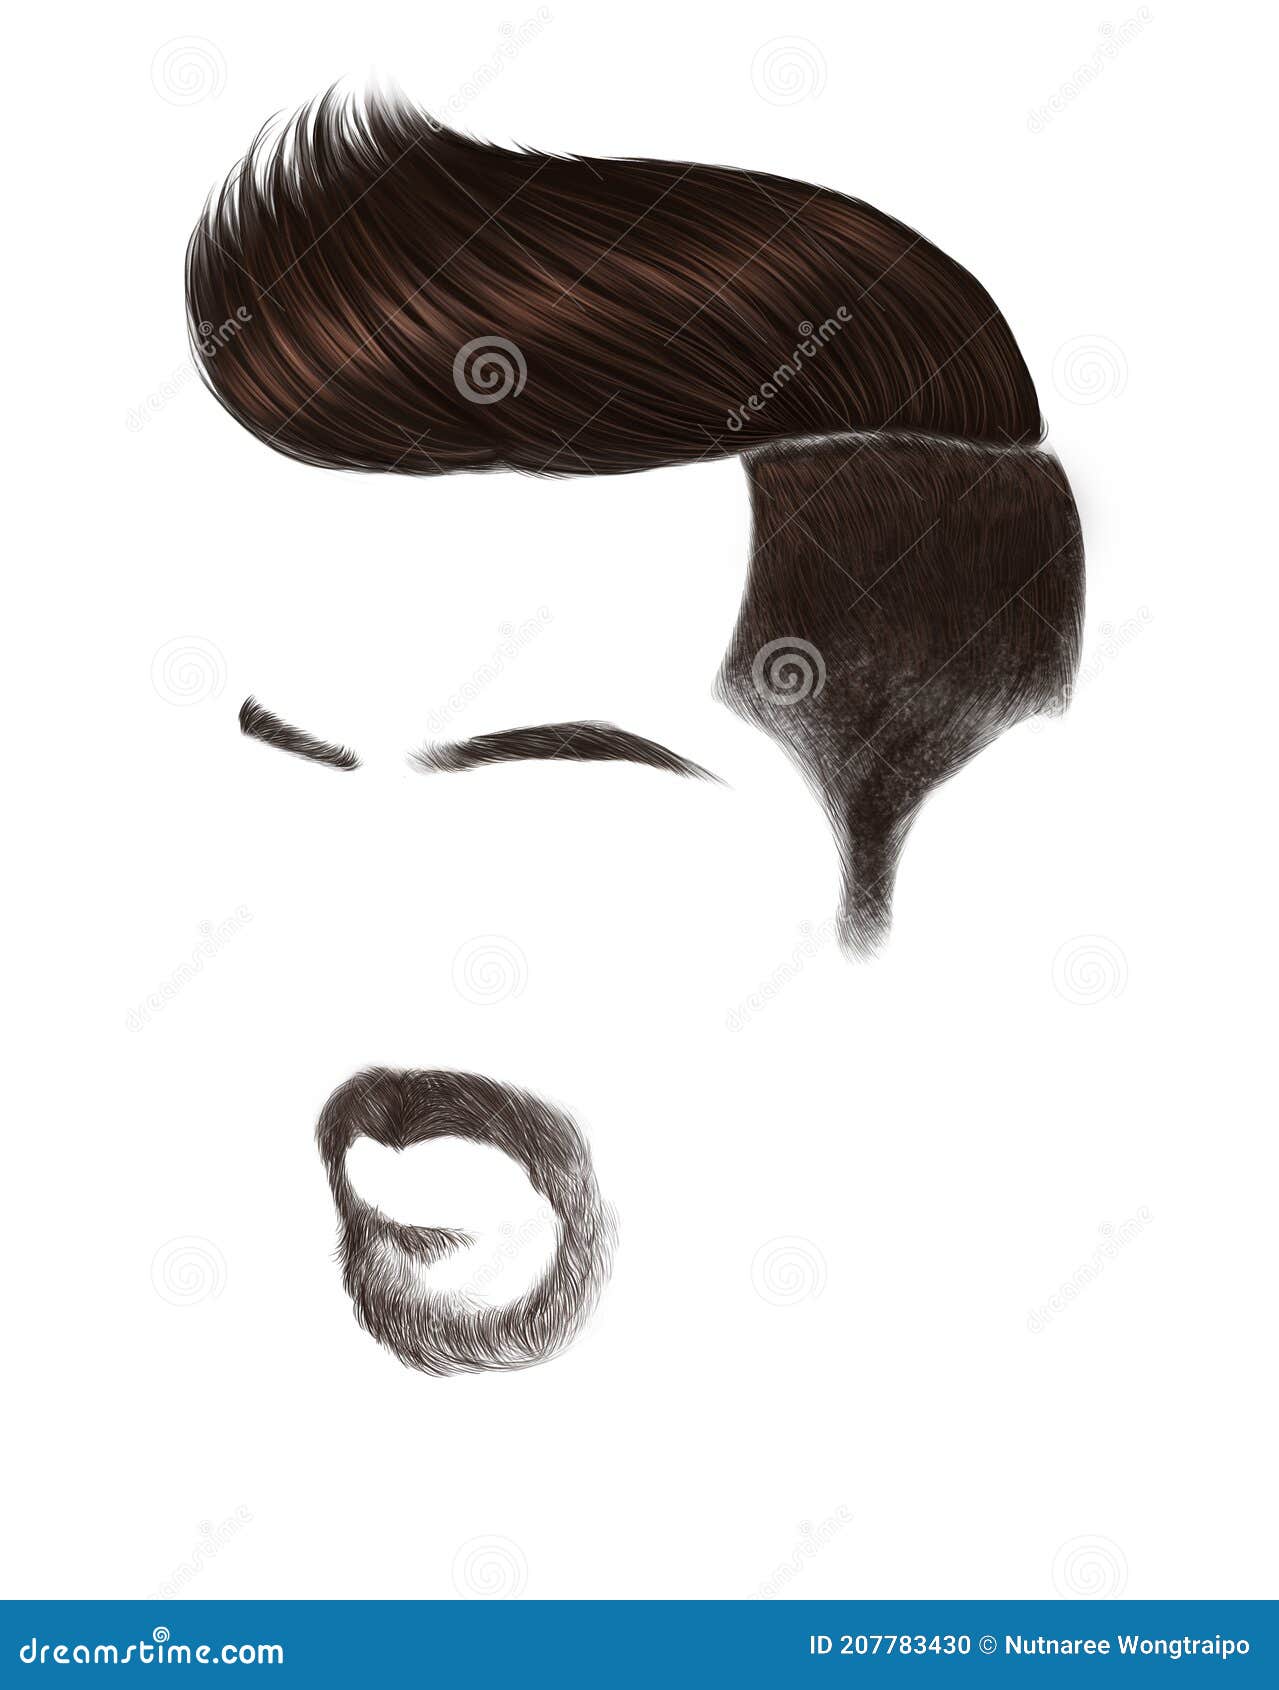 Male hairstyle stock illustration. Illustration of clipped - 207783430